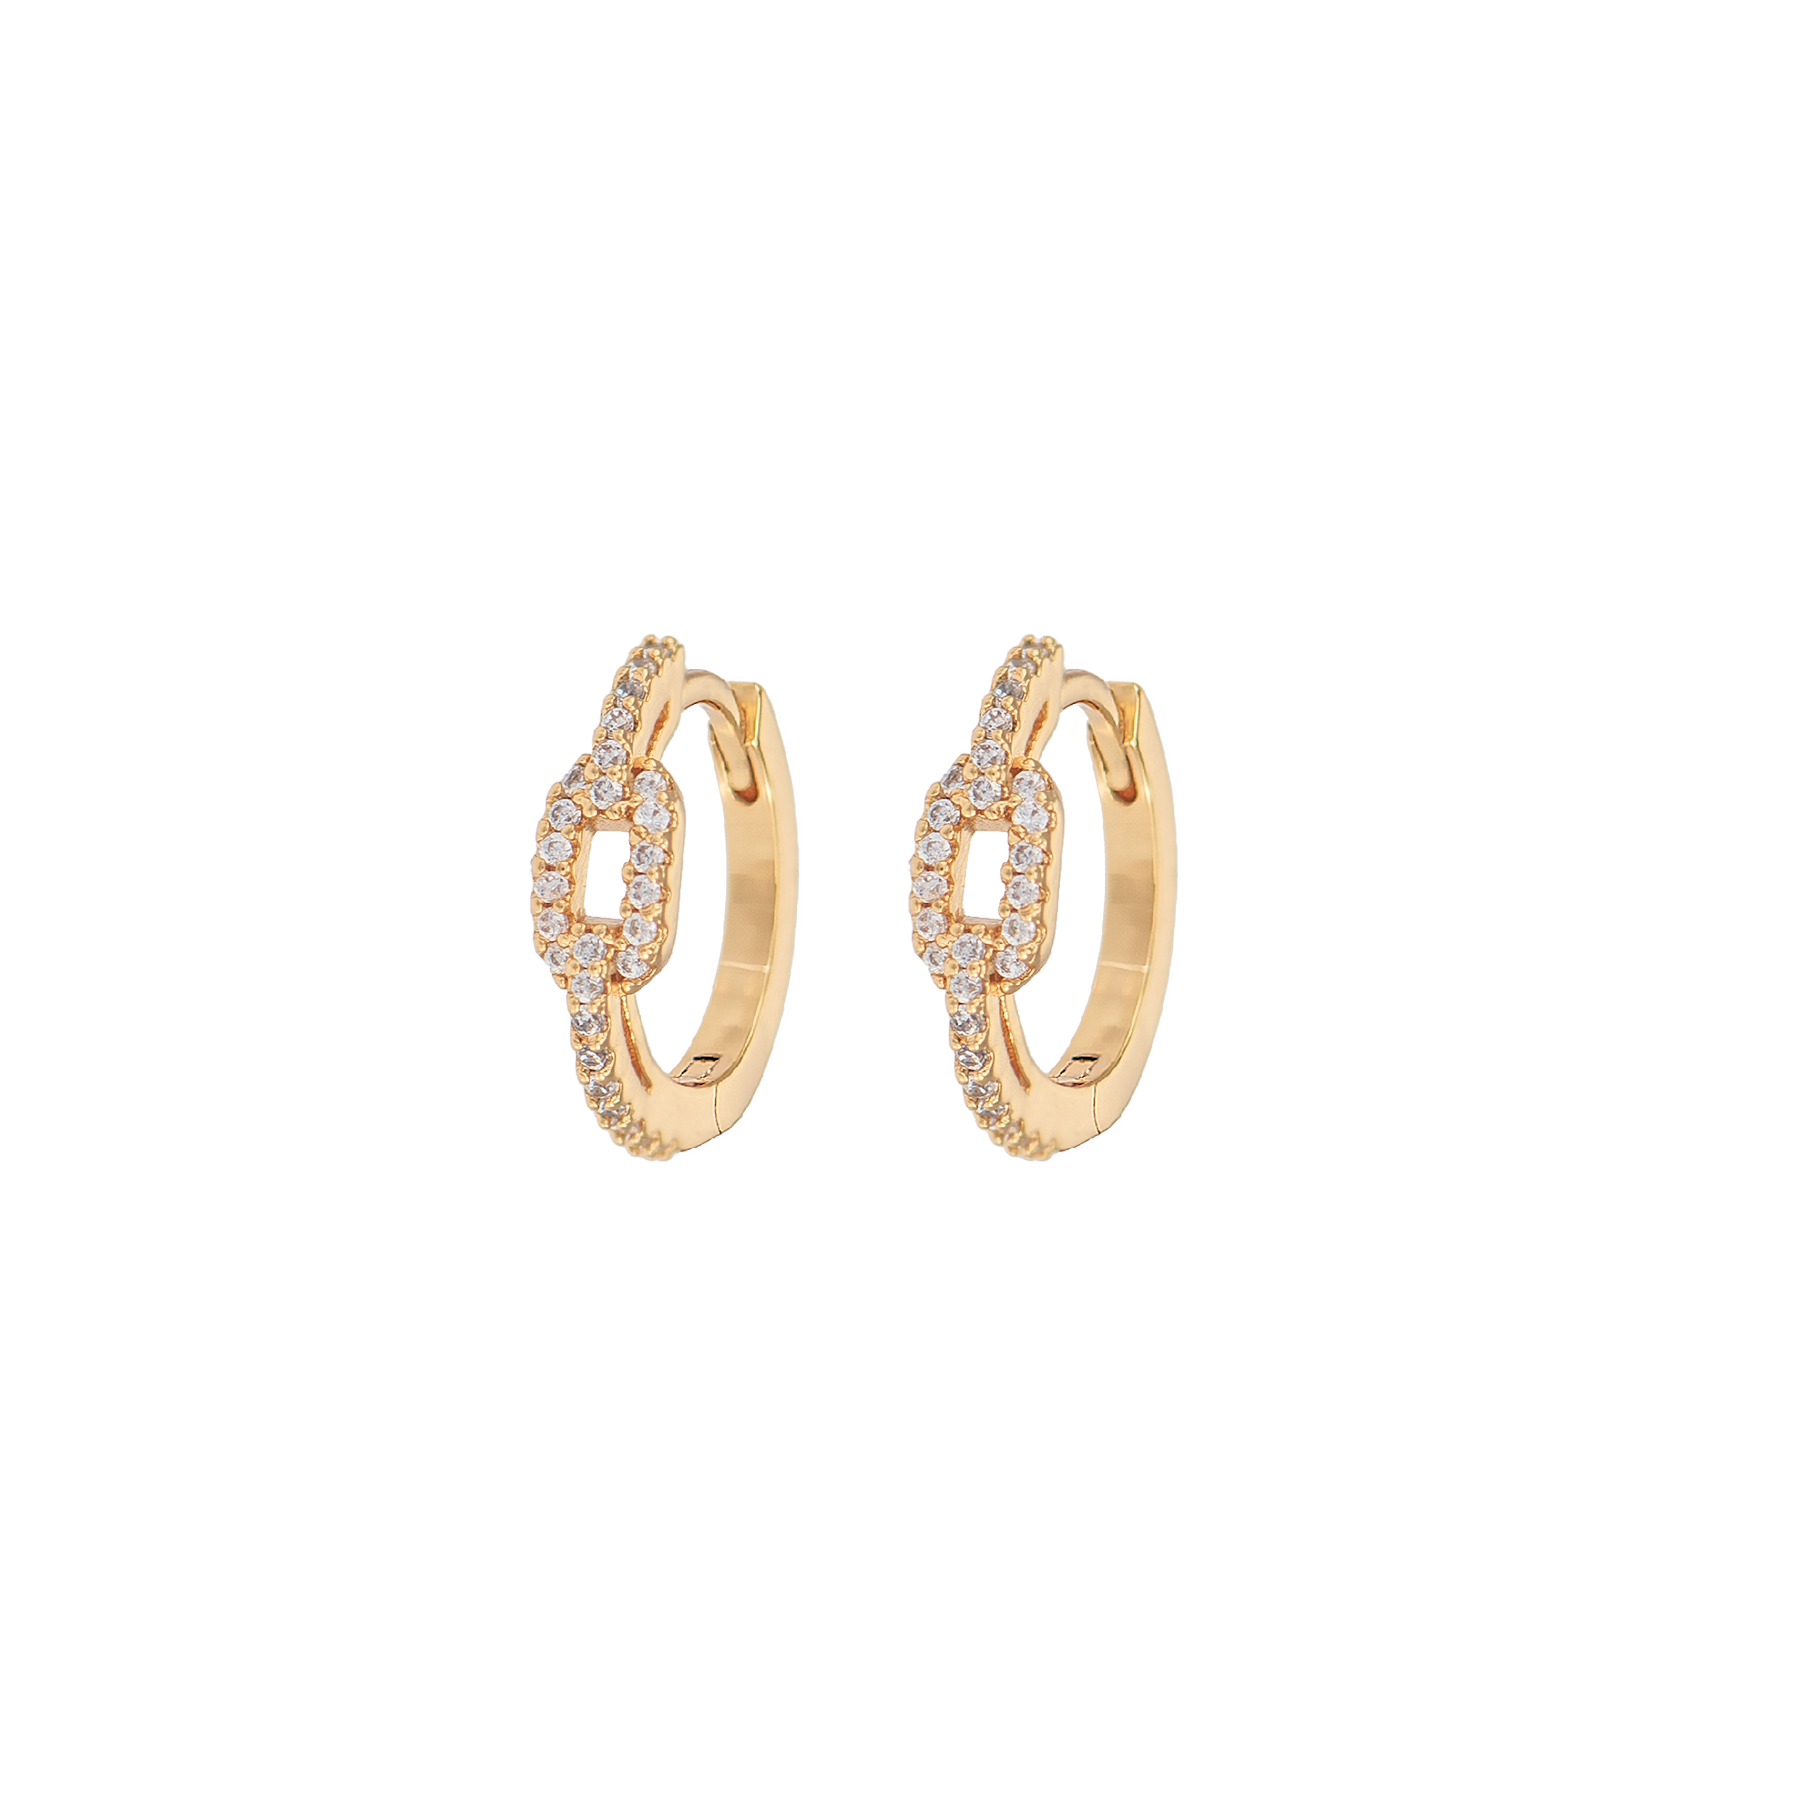 Image of Small Chain hoops from Emilia by Bon Dep